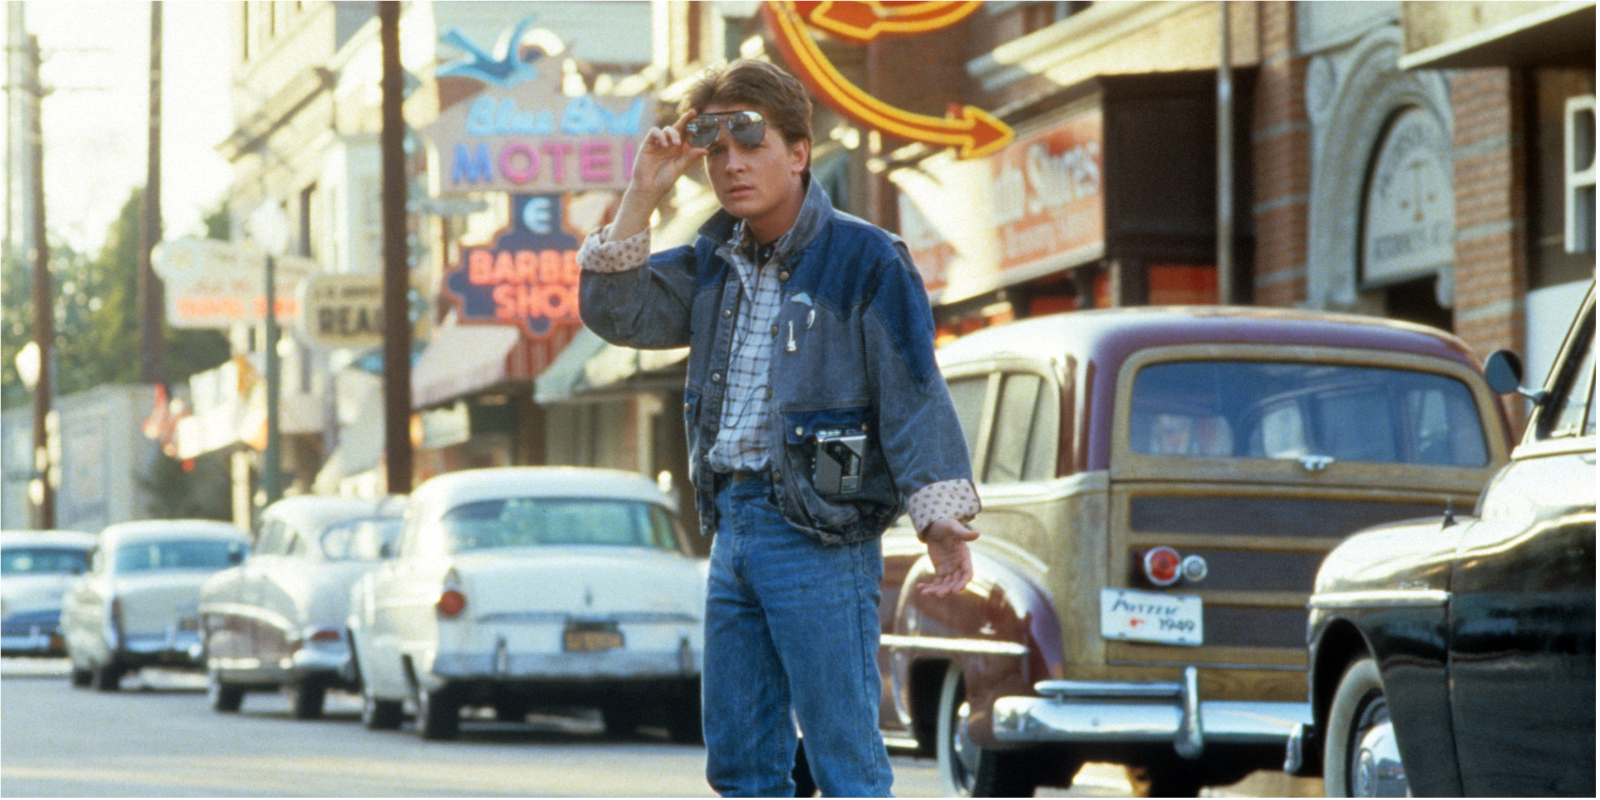 Michael J. Fox on the set of 'Back to the Future' in 1985.